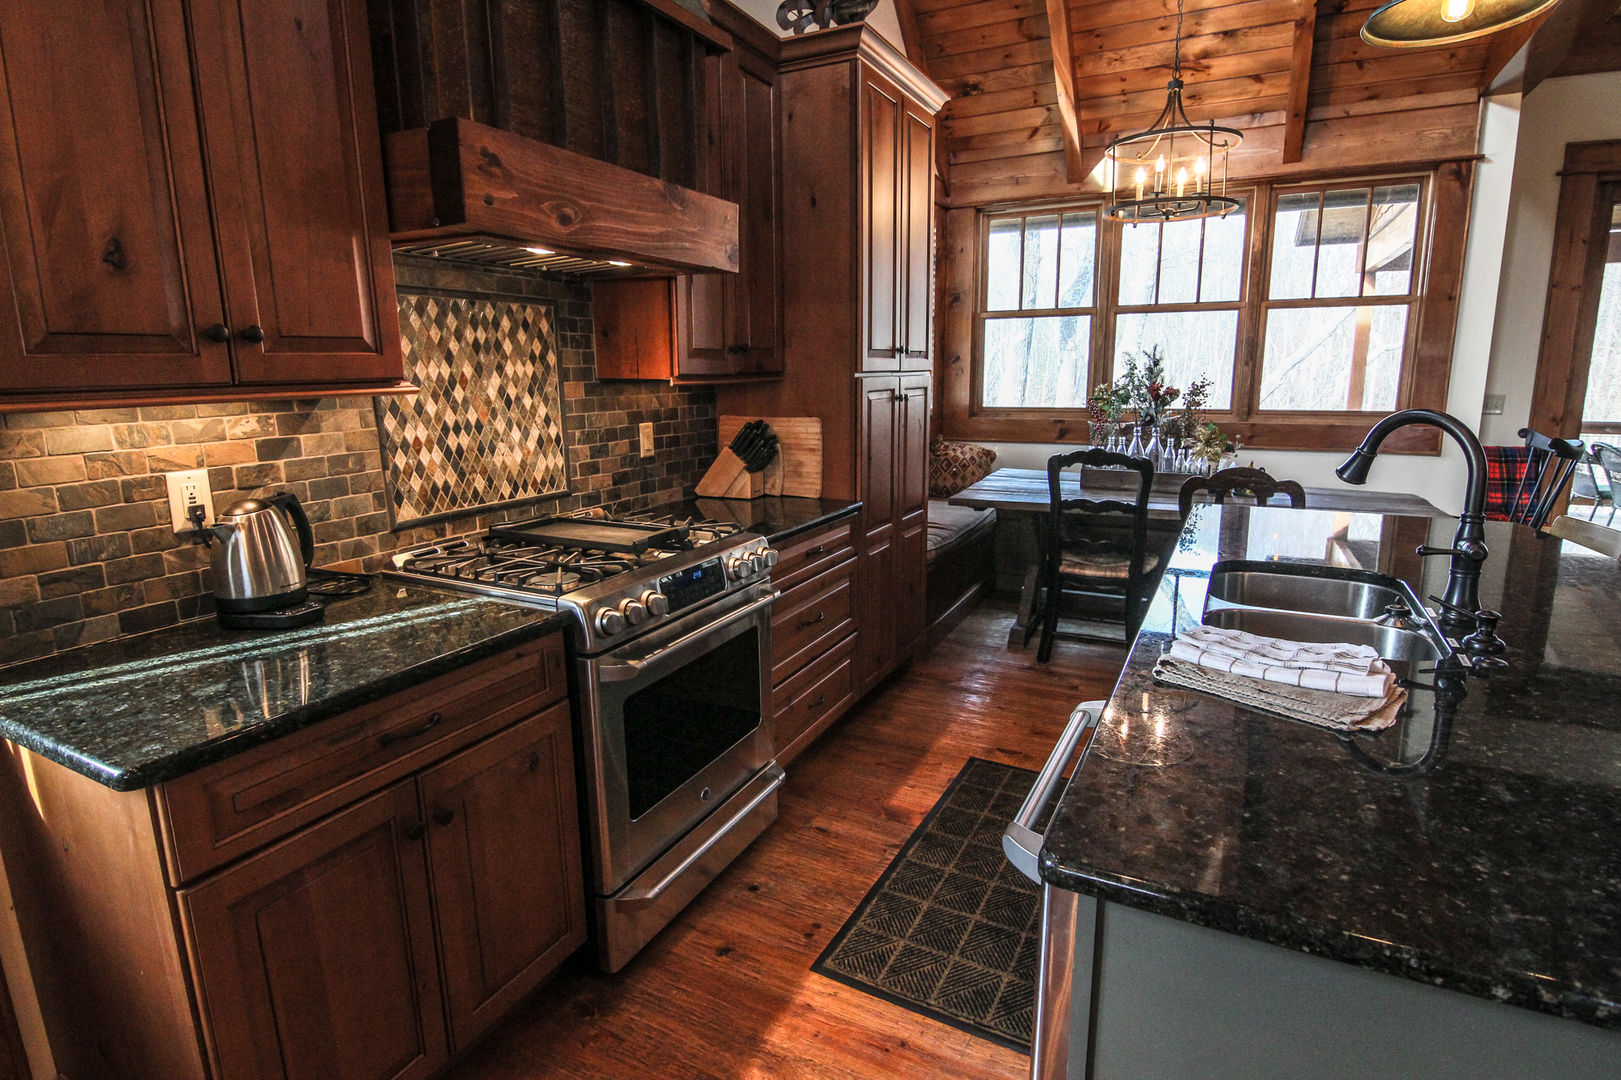 Property Info The Best Boone Nc Cabin Rentals And Blowing Rock